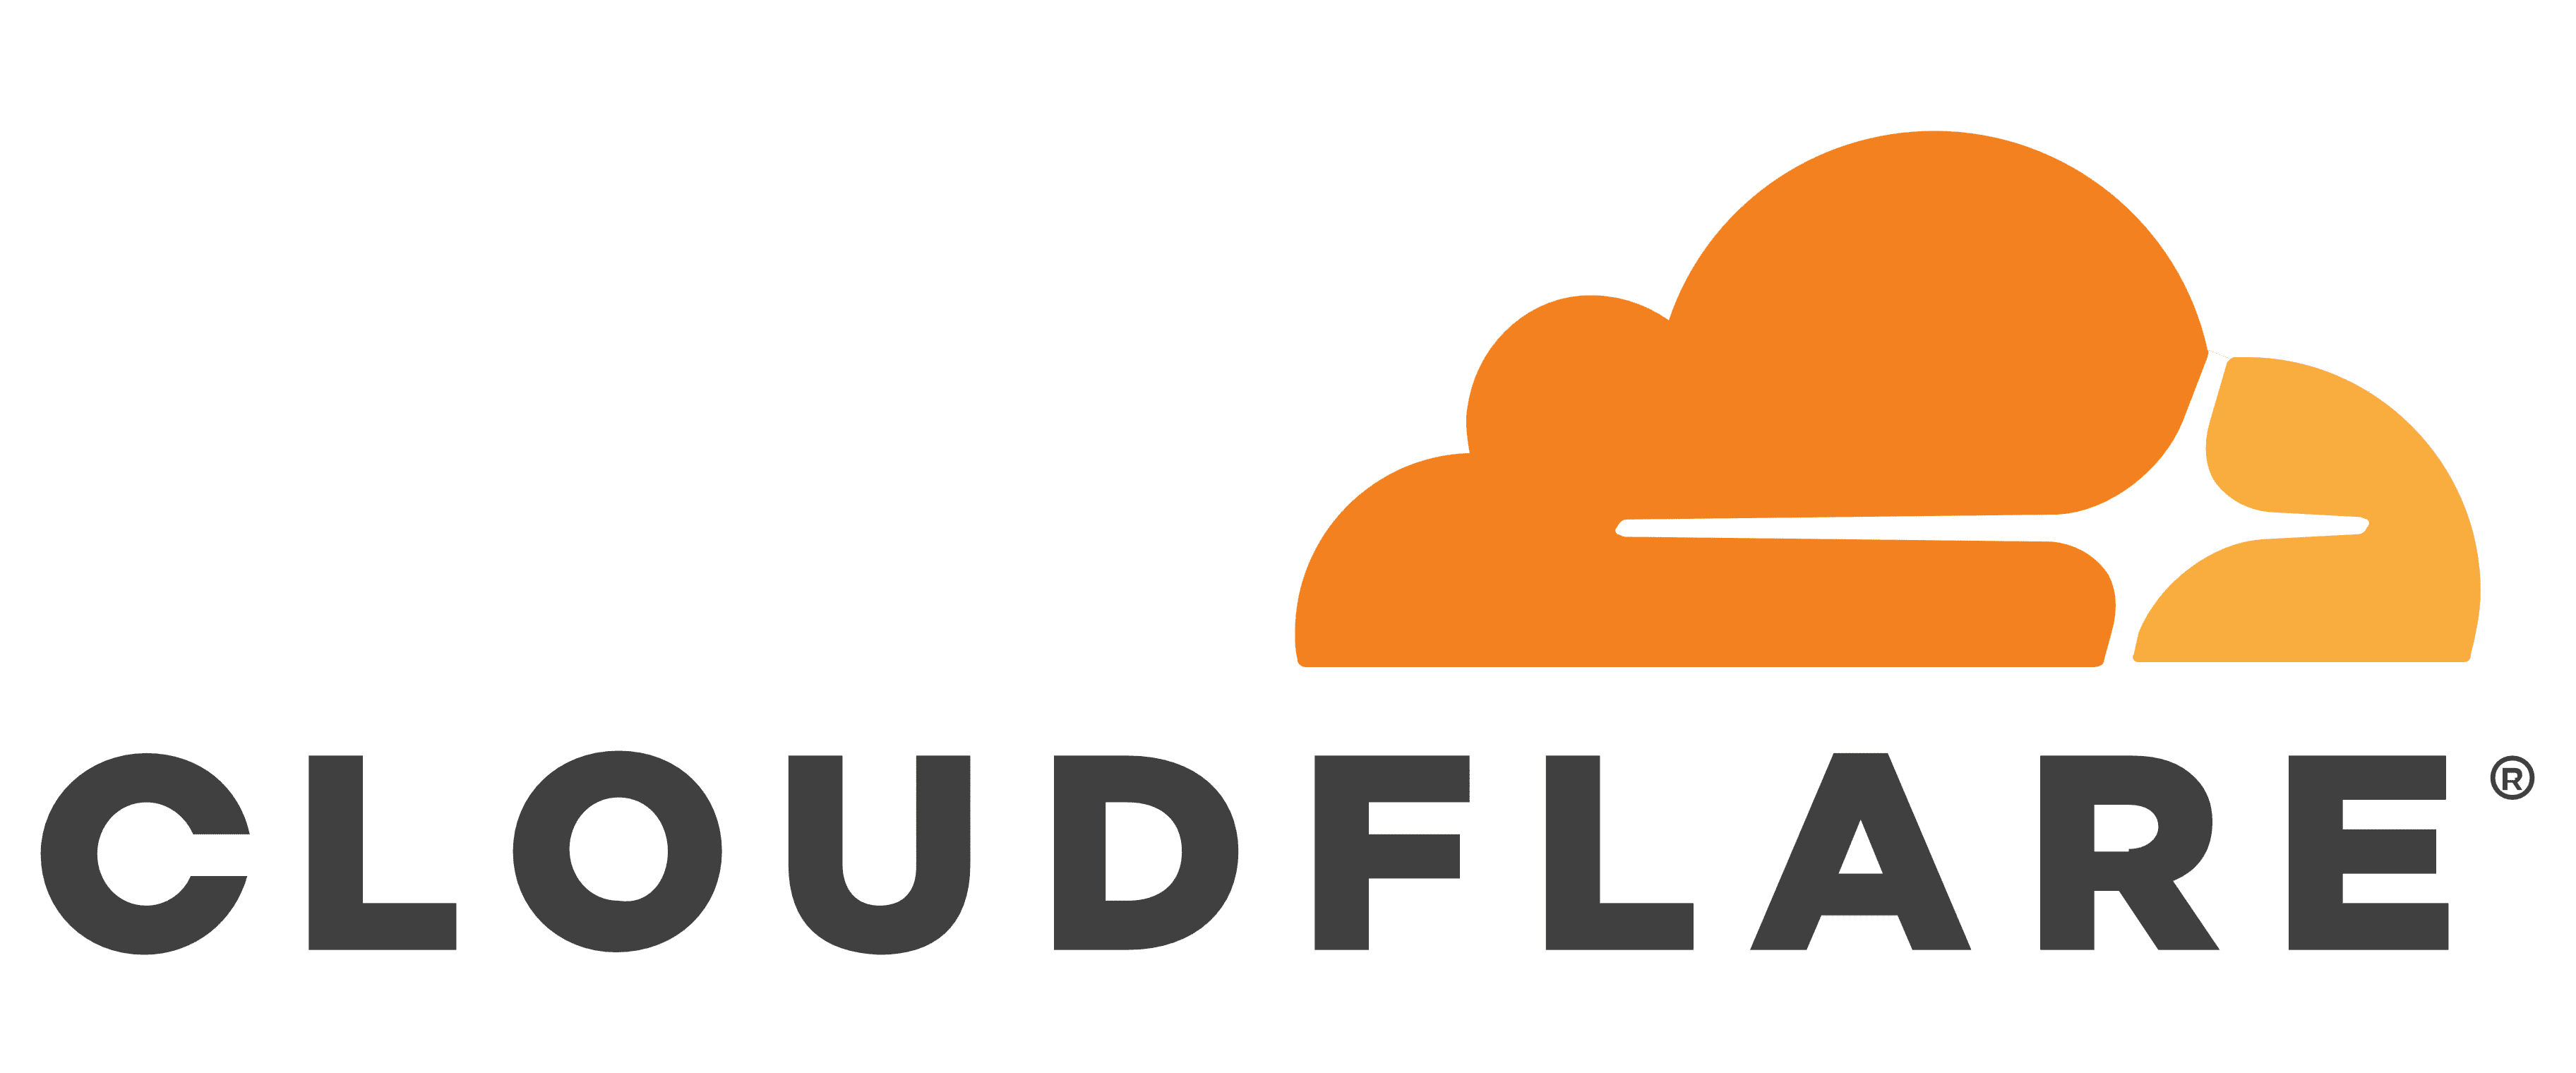 cloudflare_full_logo_png